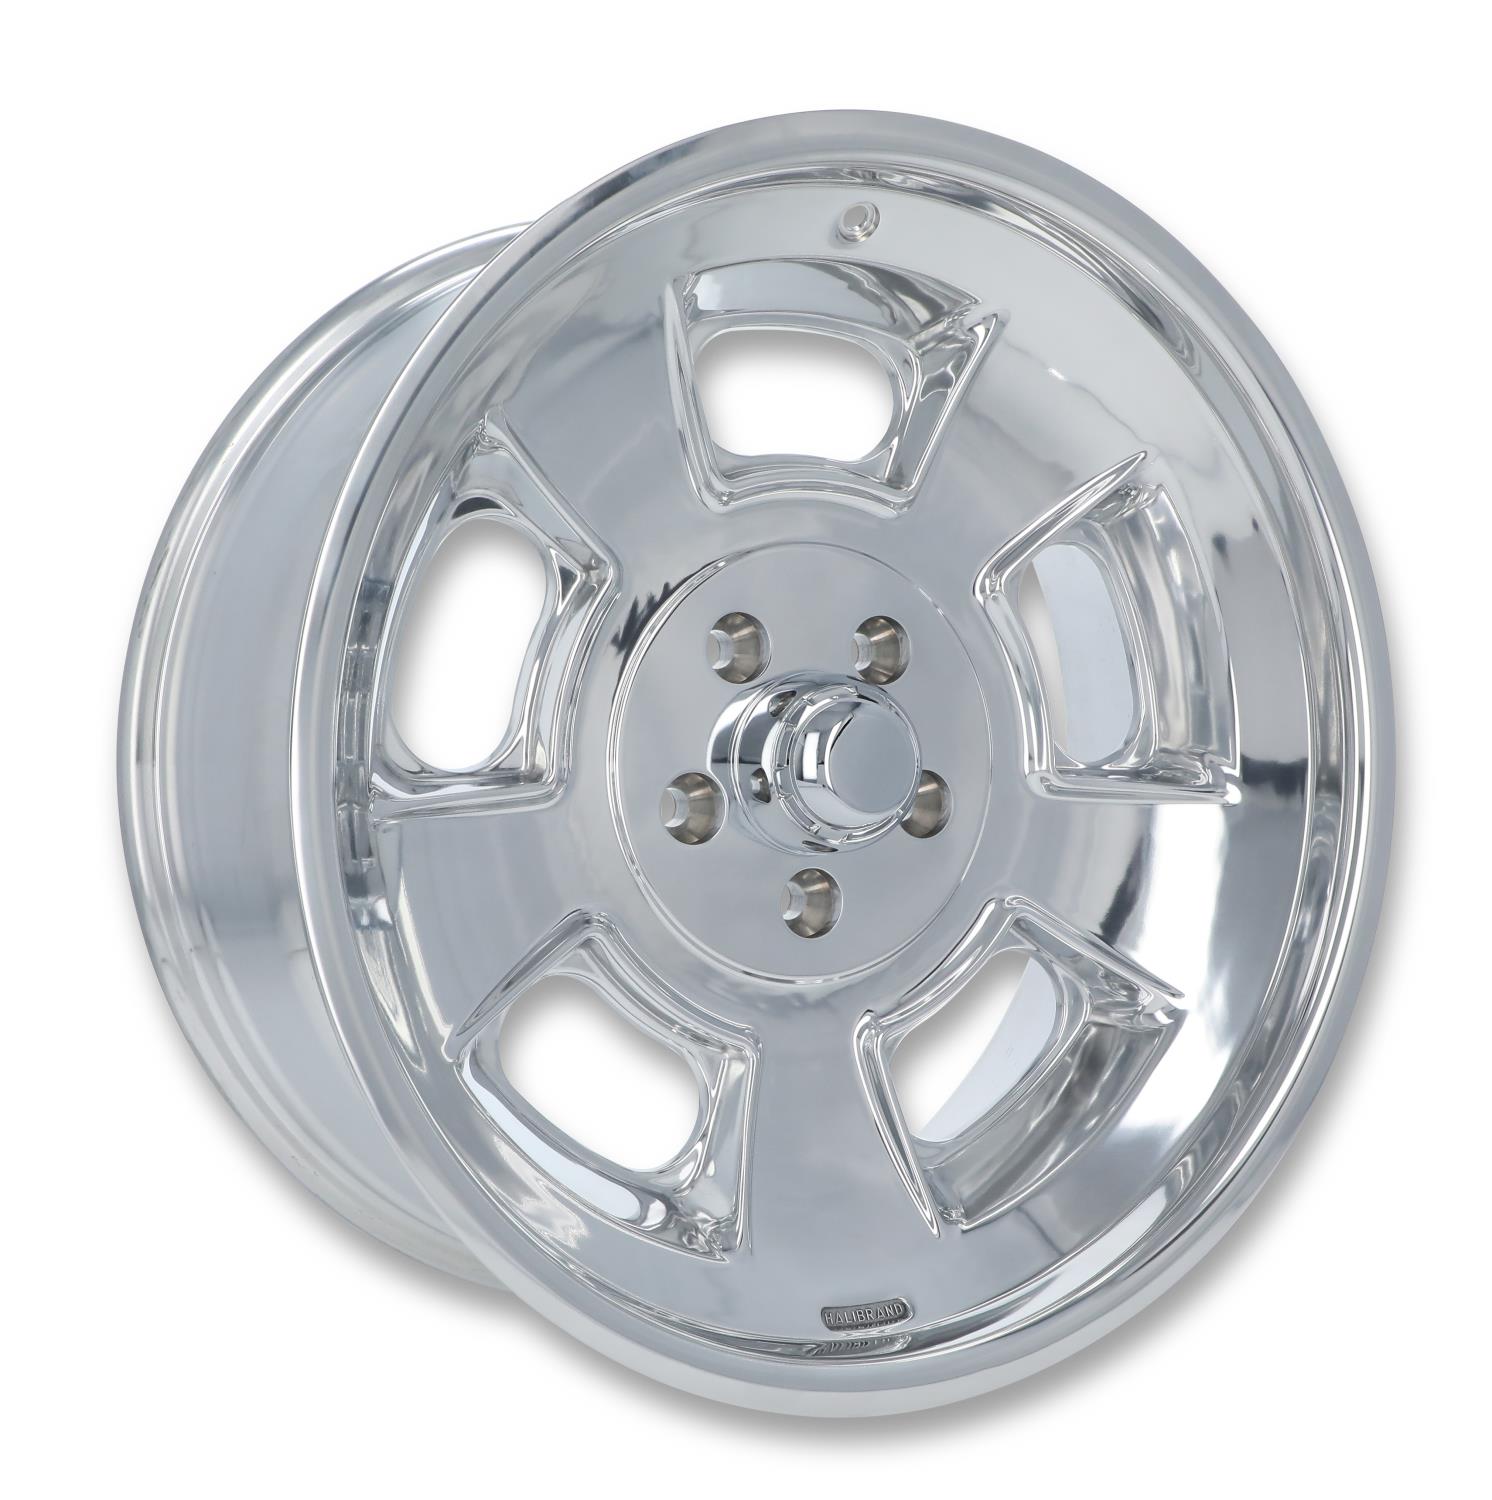 Sprint Front Wheel, Size: 20x8.5", Bolt Pattern: 5x5", Backspace: 4.75" [Polished - No Clearcoat]